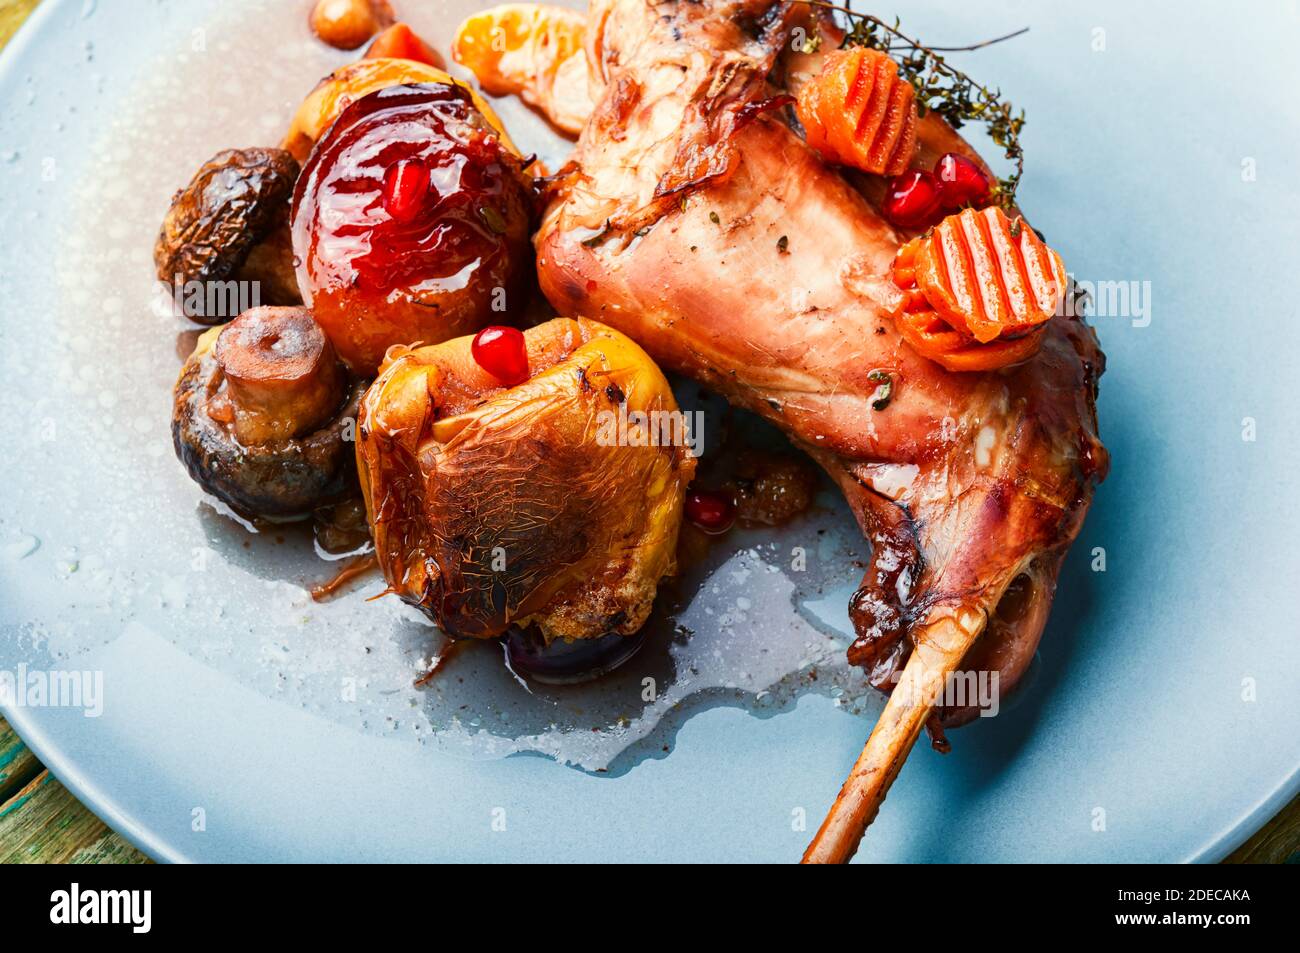 Baked rabbit leg with apples, carrots and mushrooms. Stock Photo